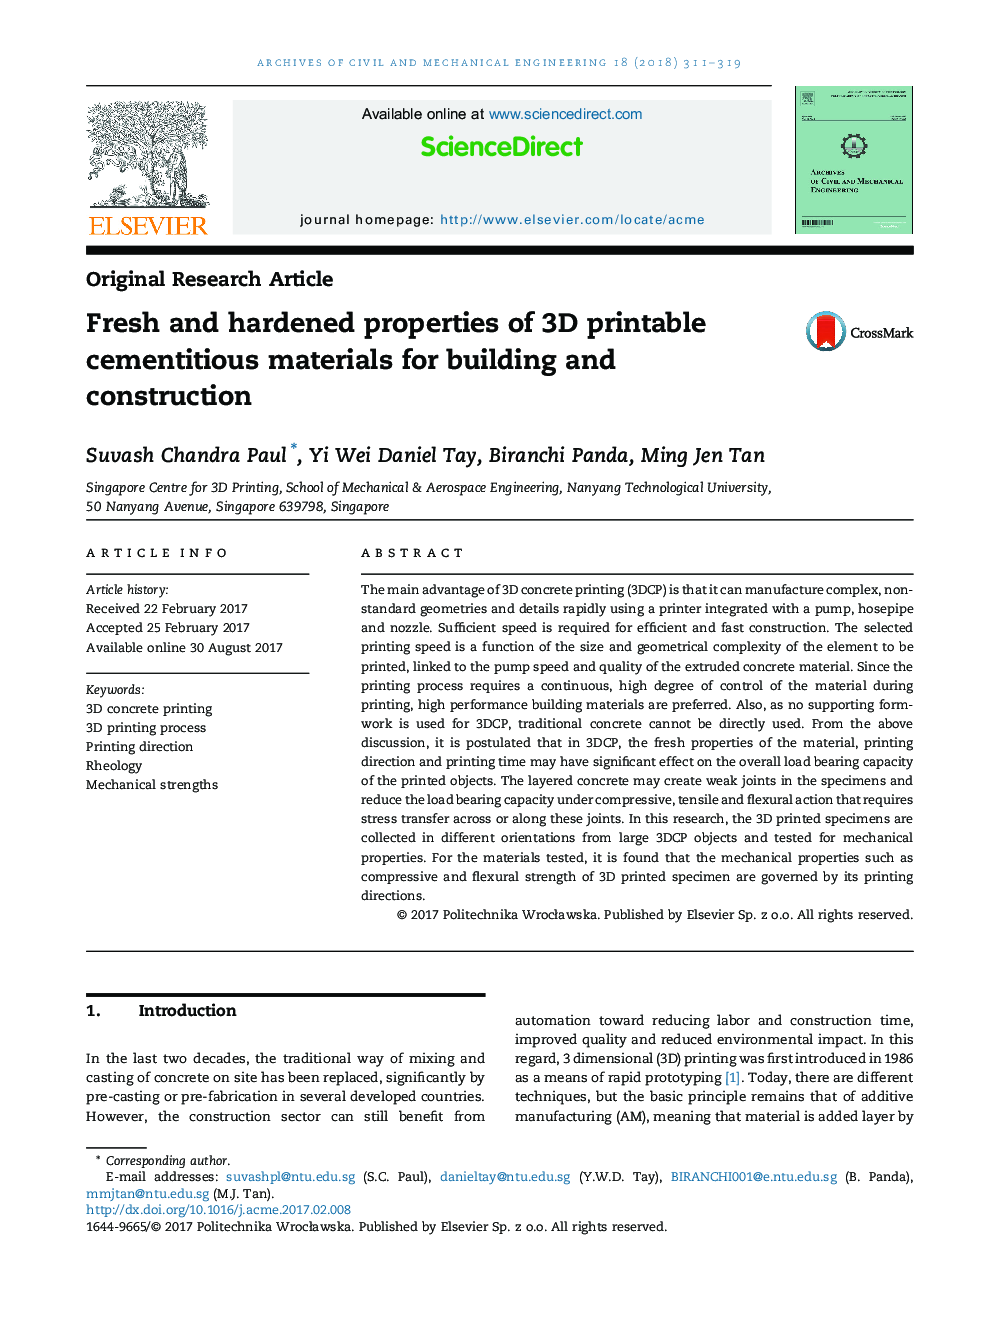 Fresh and hardened properties of 3D printable cementitious materials for building and construction